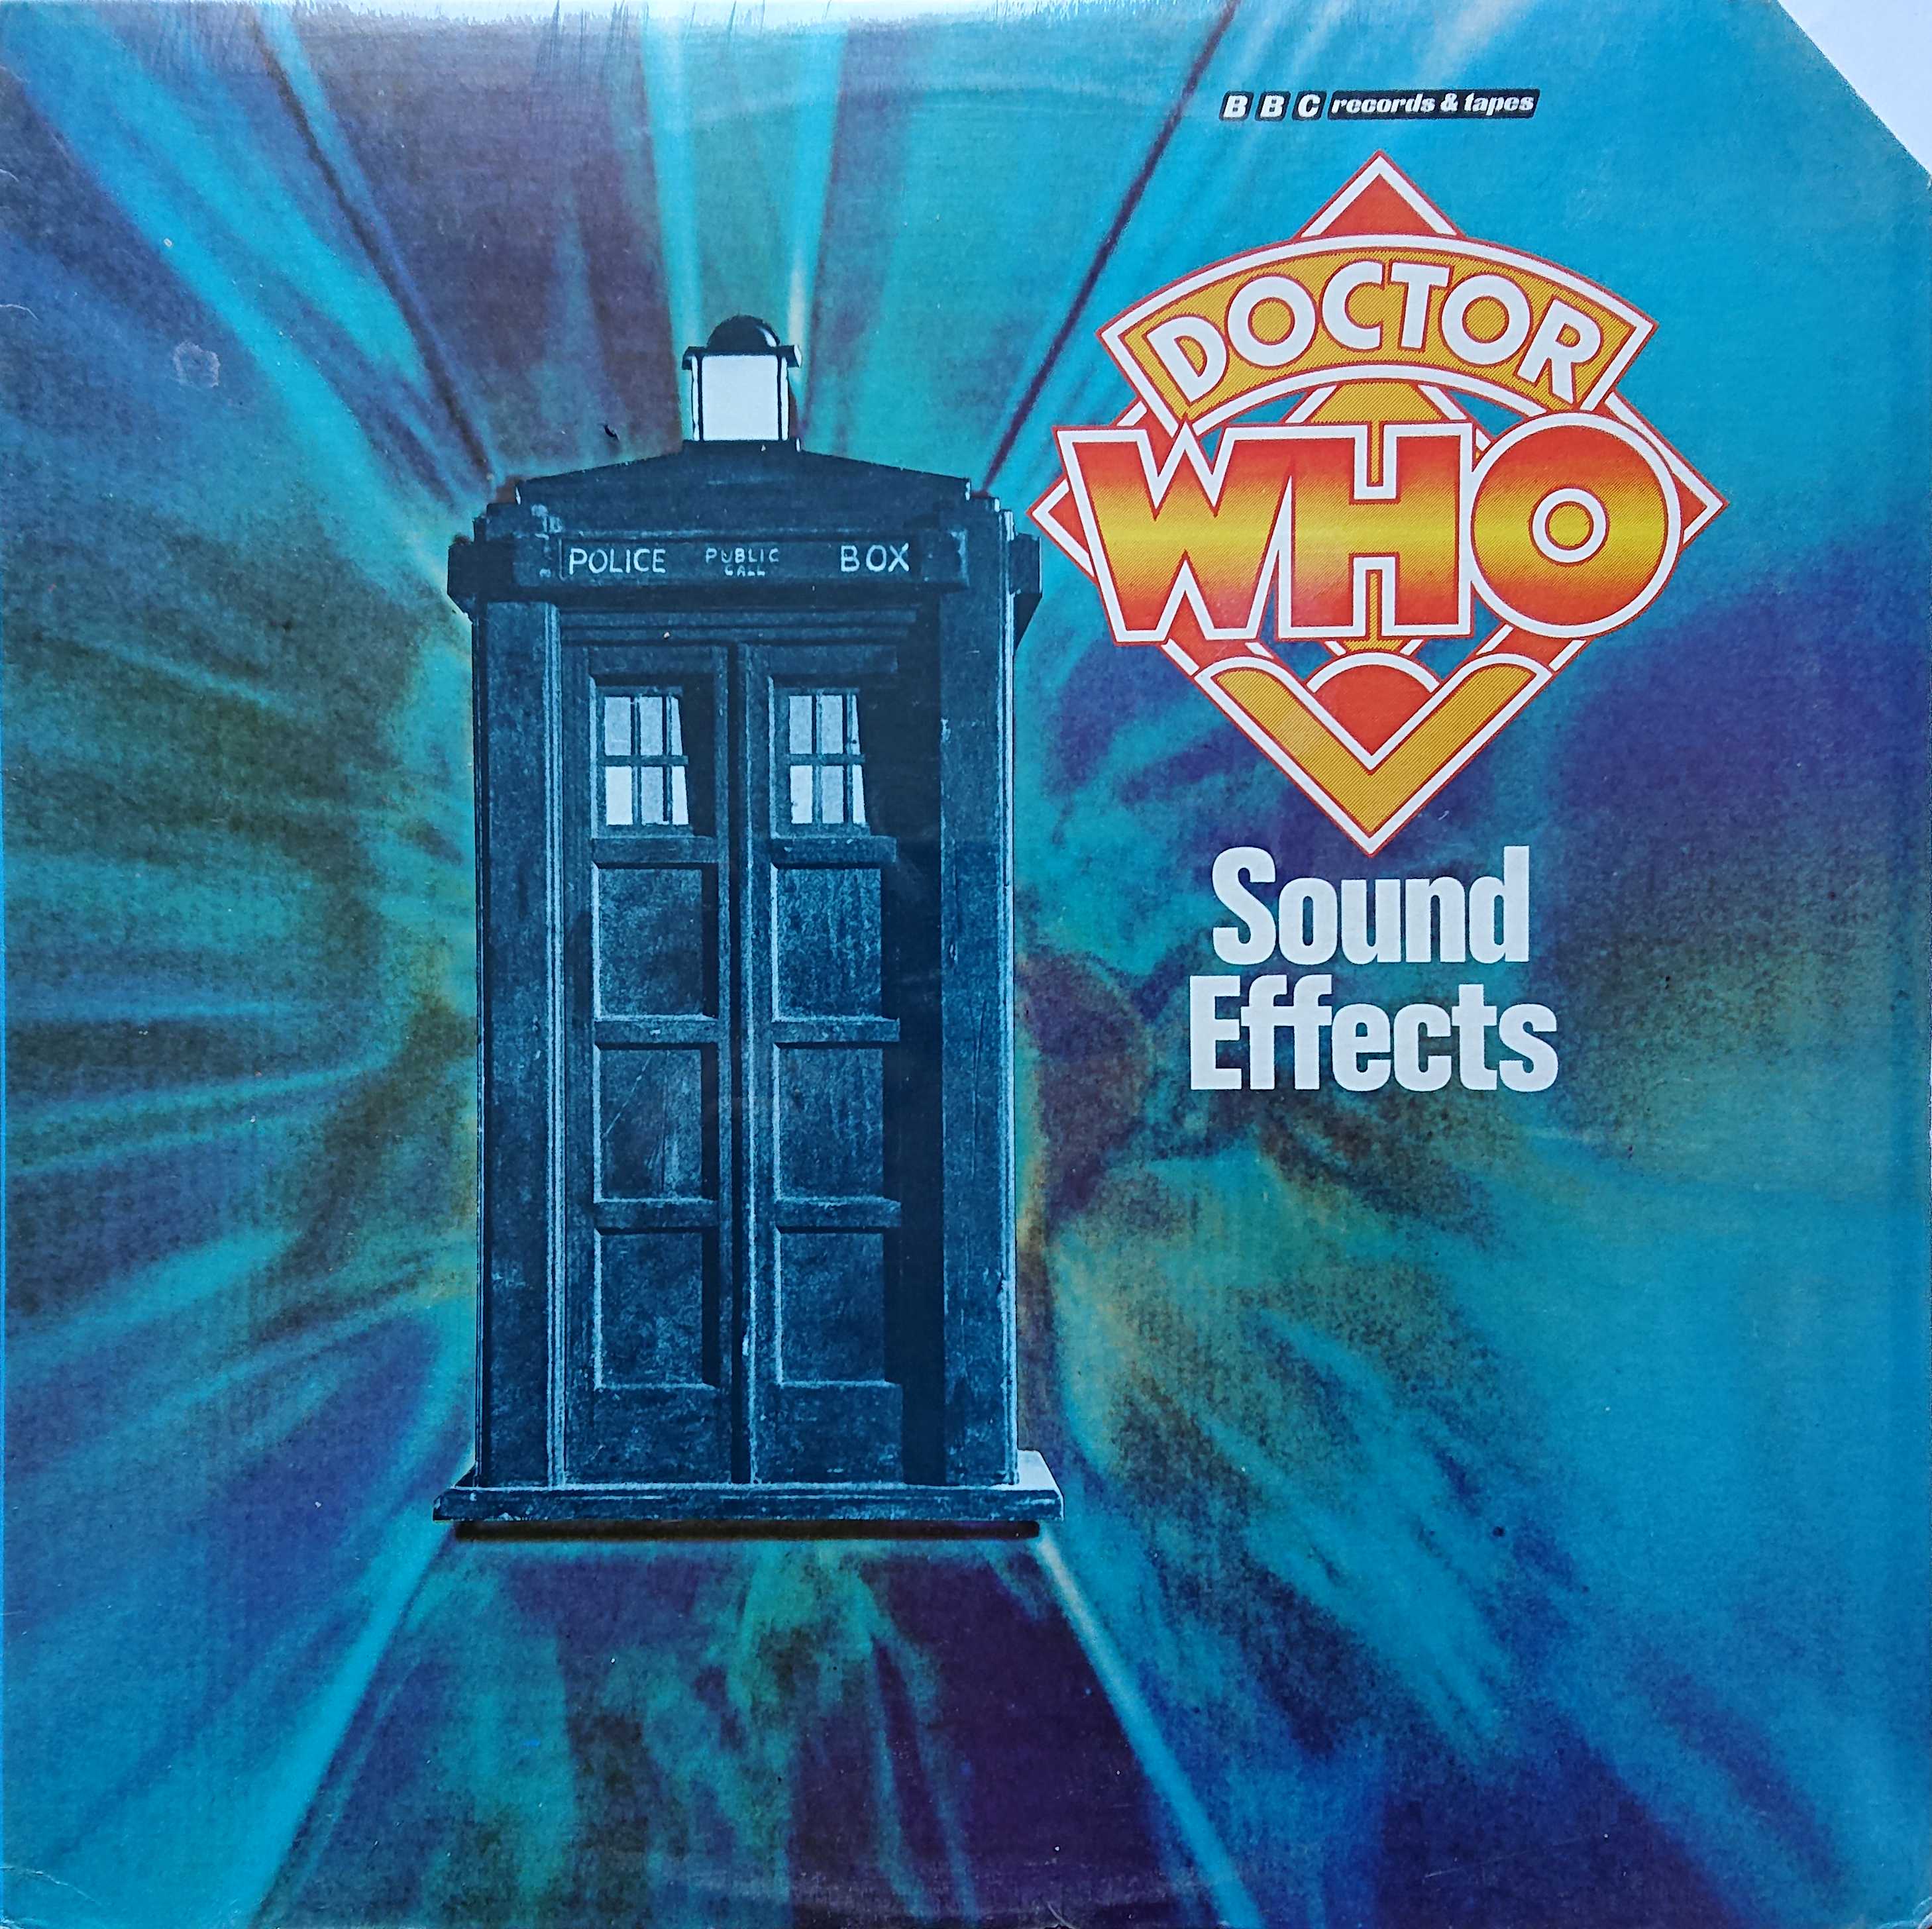 Picture of TRC - 918 Doctor Who sound effects by artist BBC radiophonic workshop from the BBC albums - Records and Tapes library